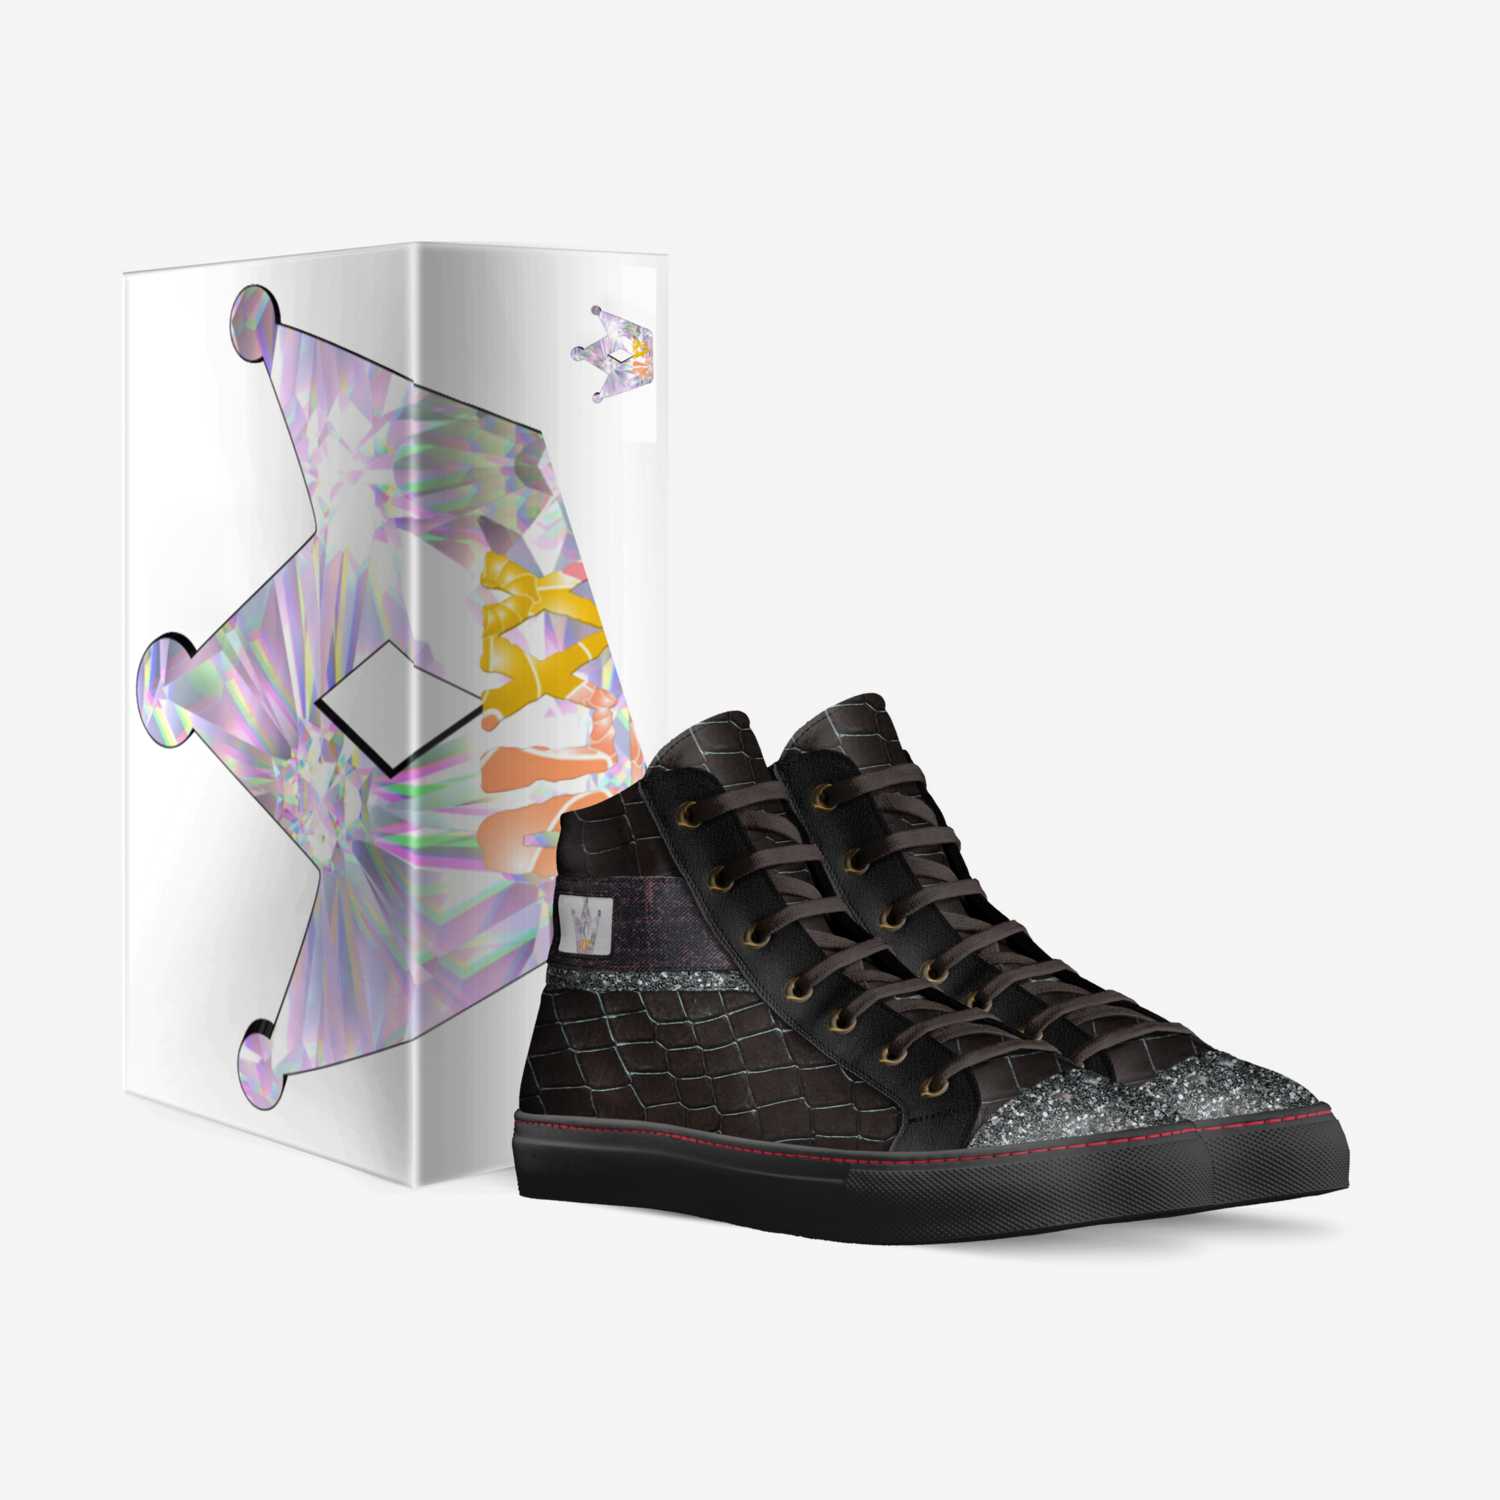 ∆LXX.BLACUZ custom made in Italy shoes by Alexander Bowie | Box view